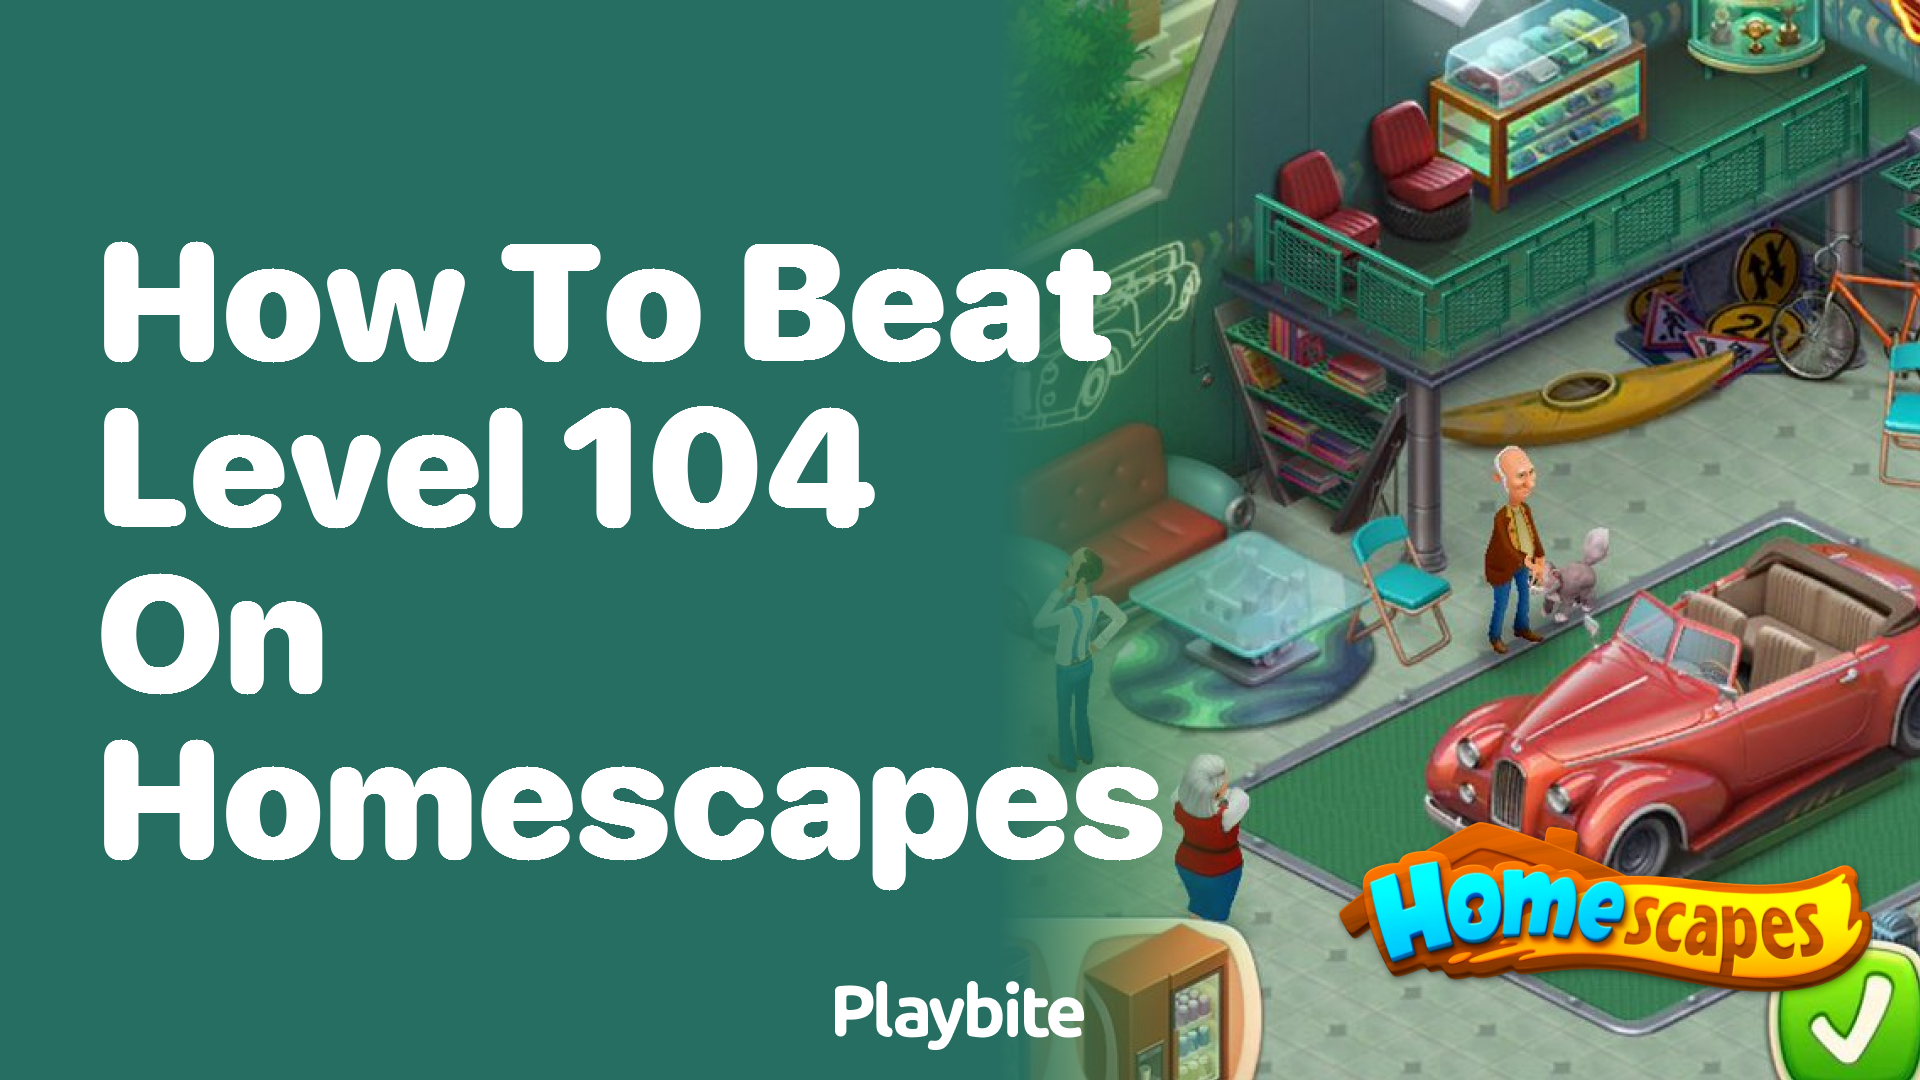 How to Beat Level 104 on Homescapes?